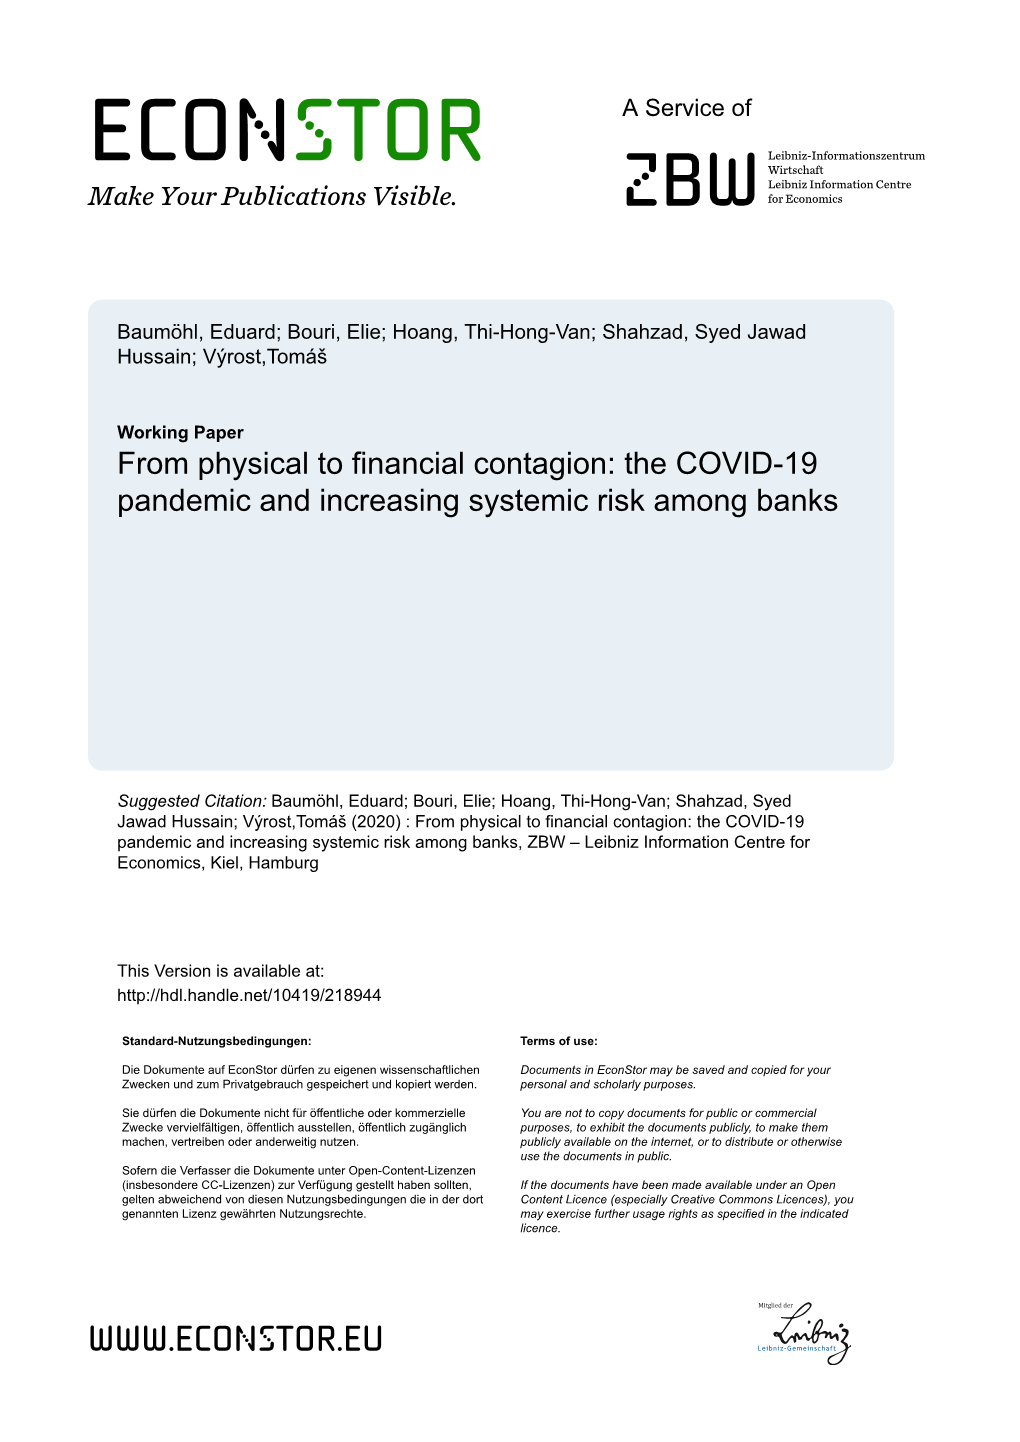 The COVID-19 Pandemic and Increasing Systemic Risk Among Banks